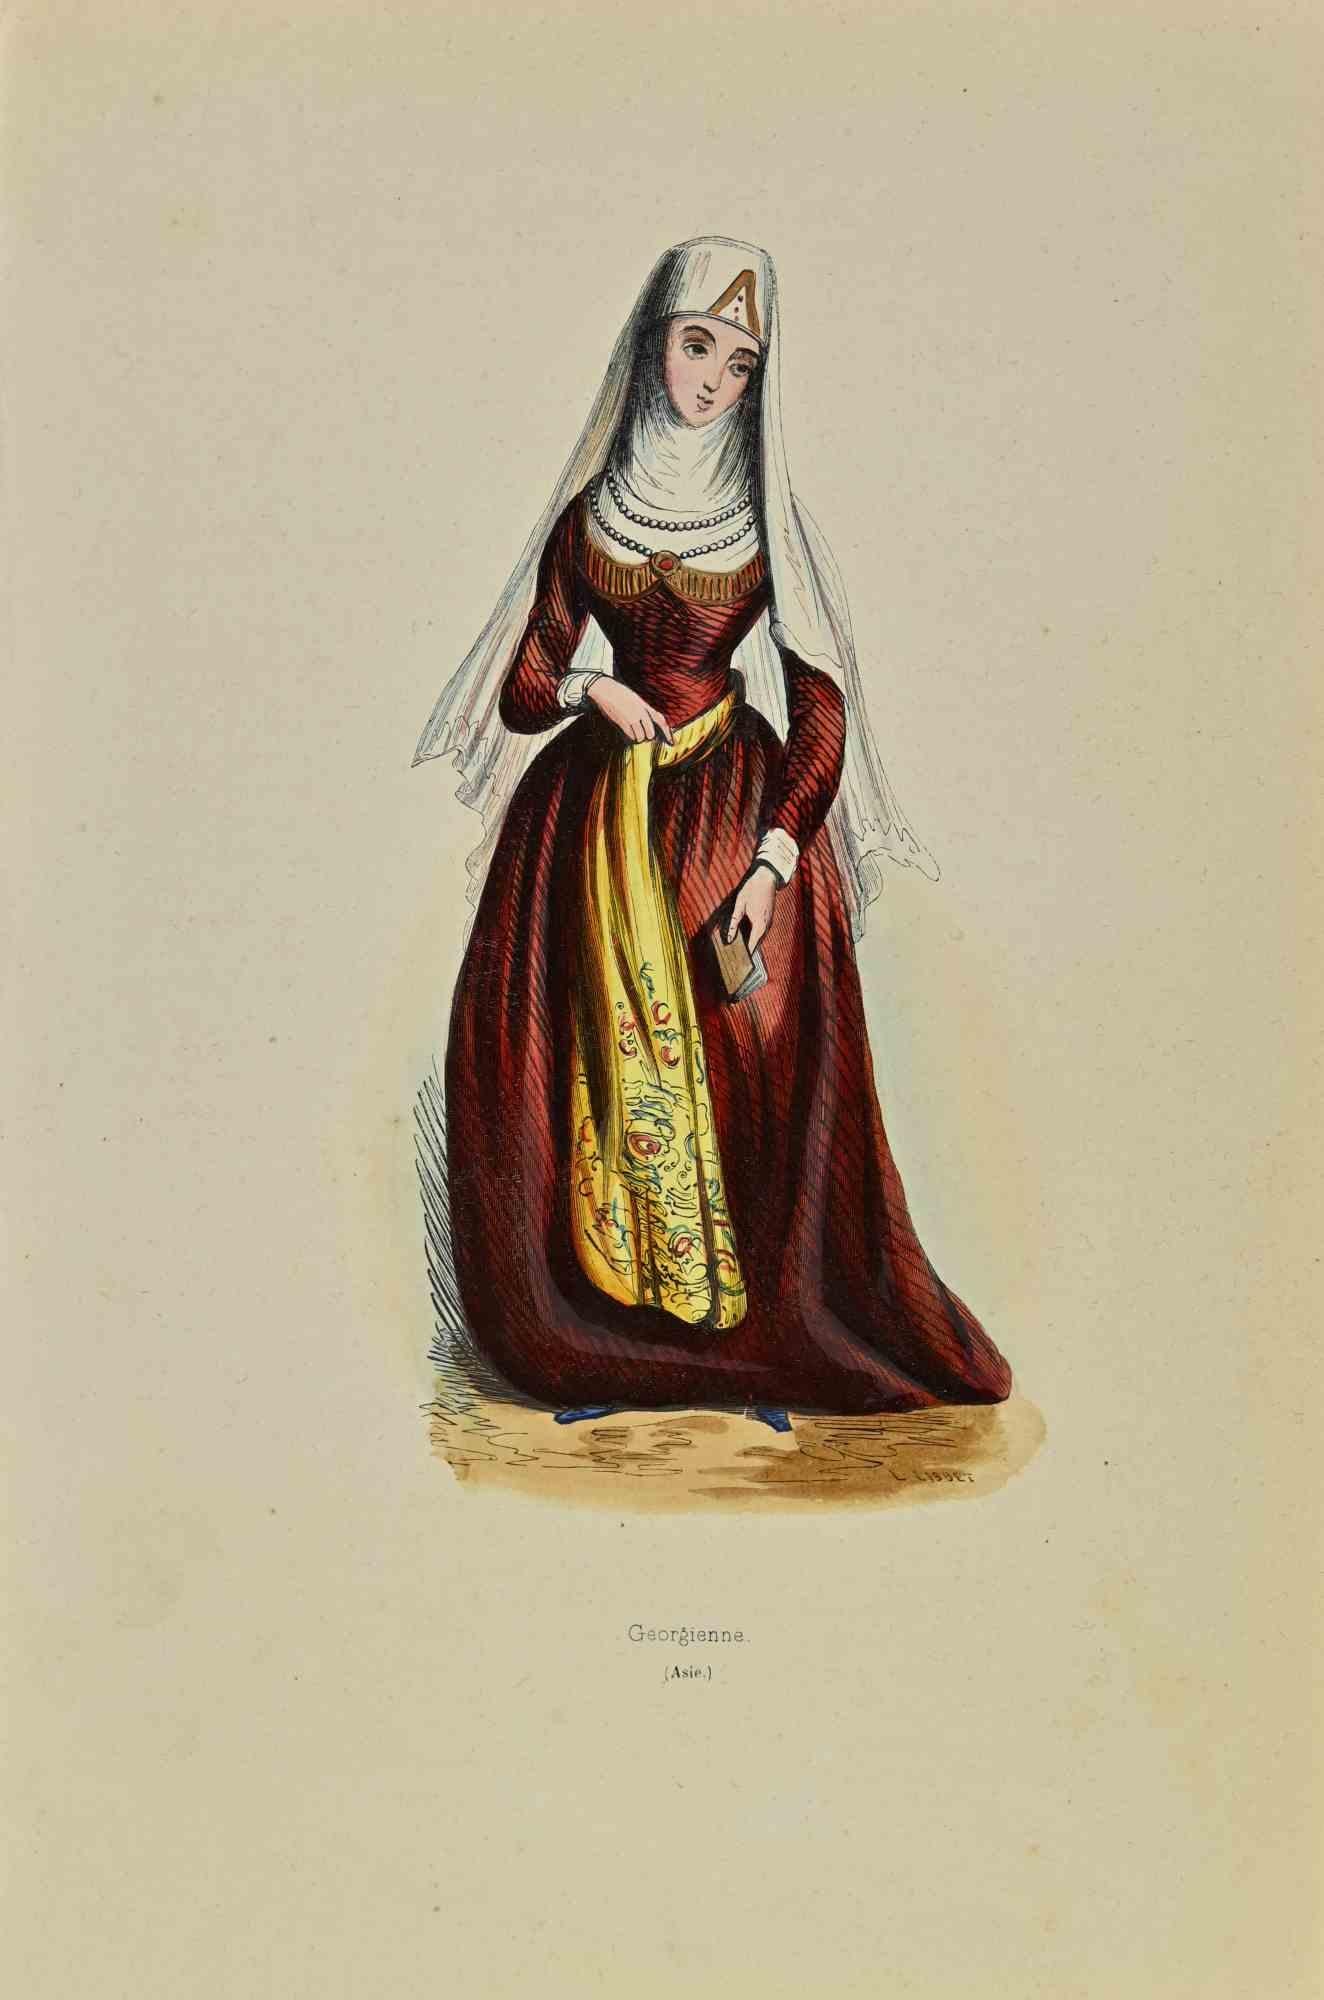 Georgian - Lithograph by Auguste Wahlen - 1844